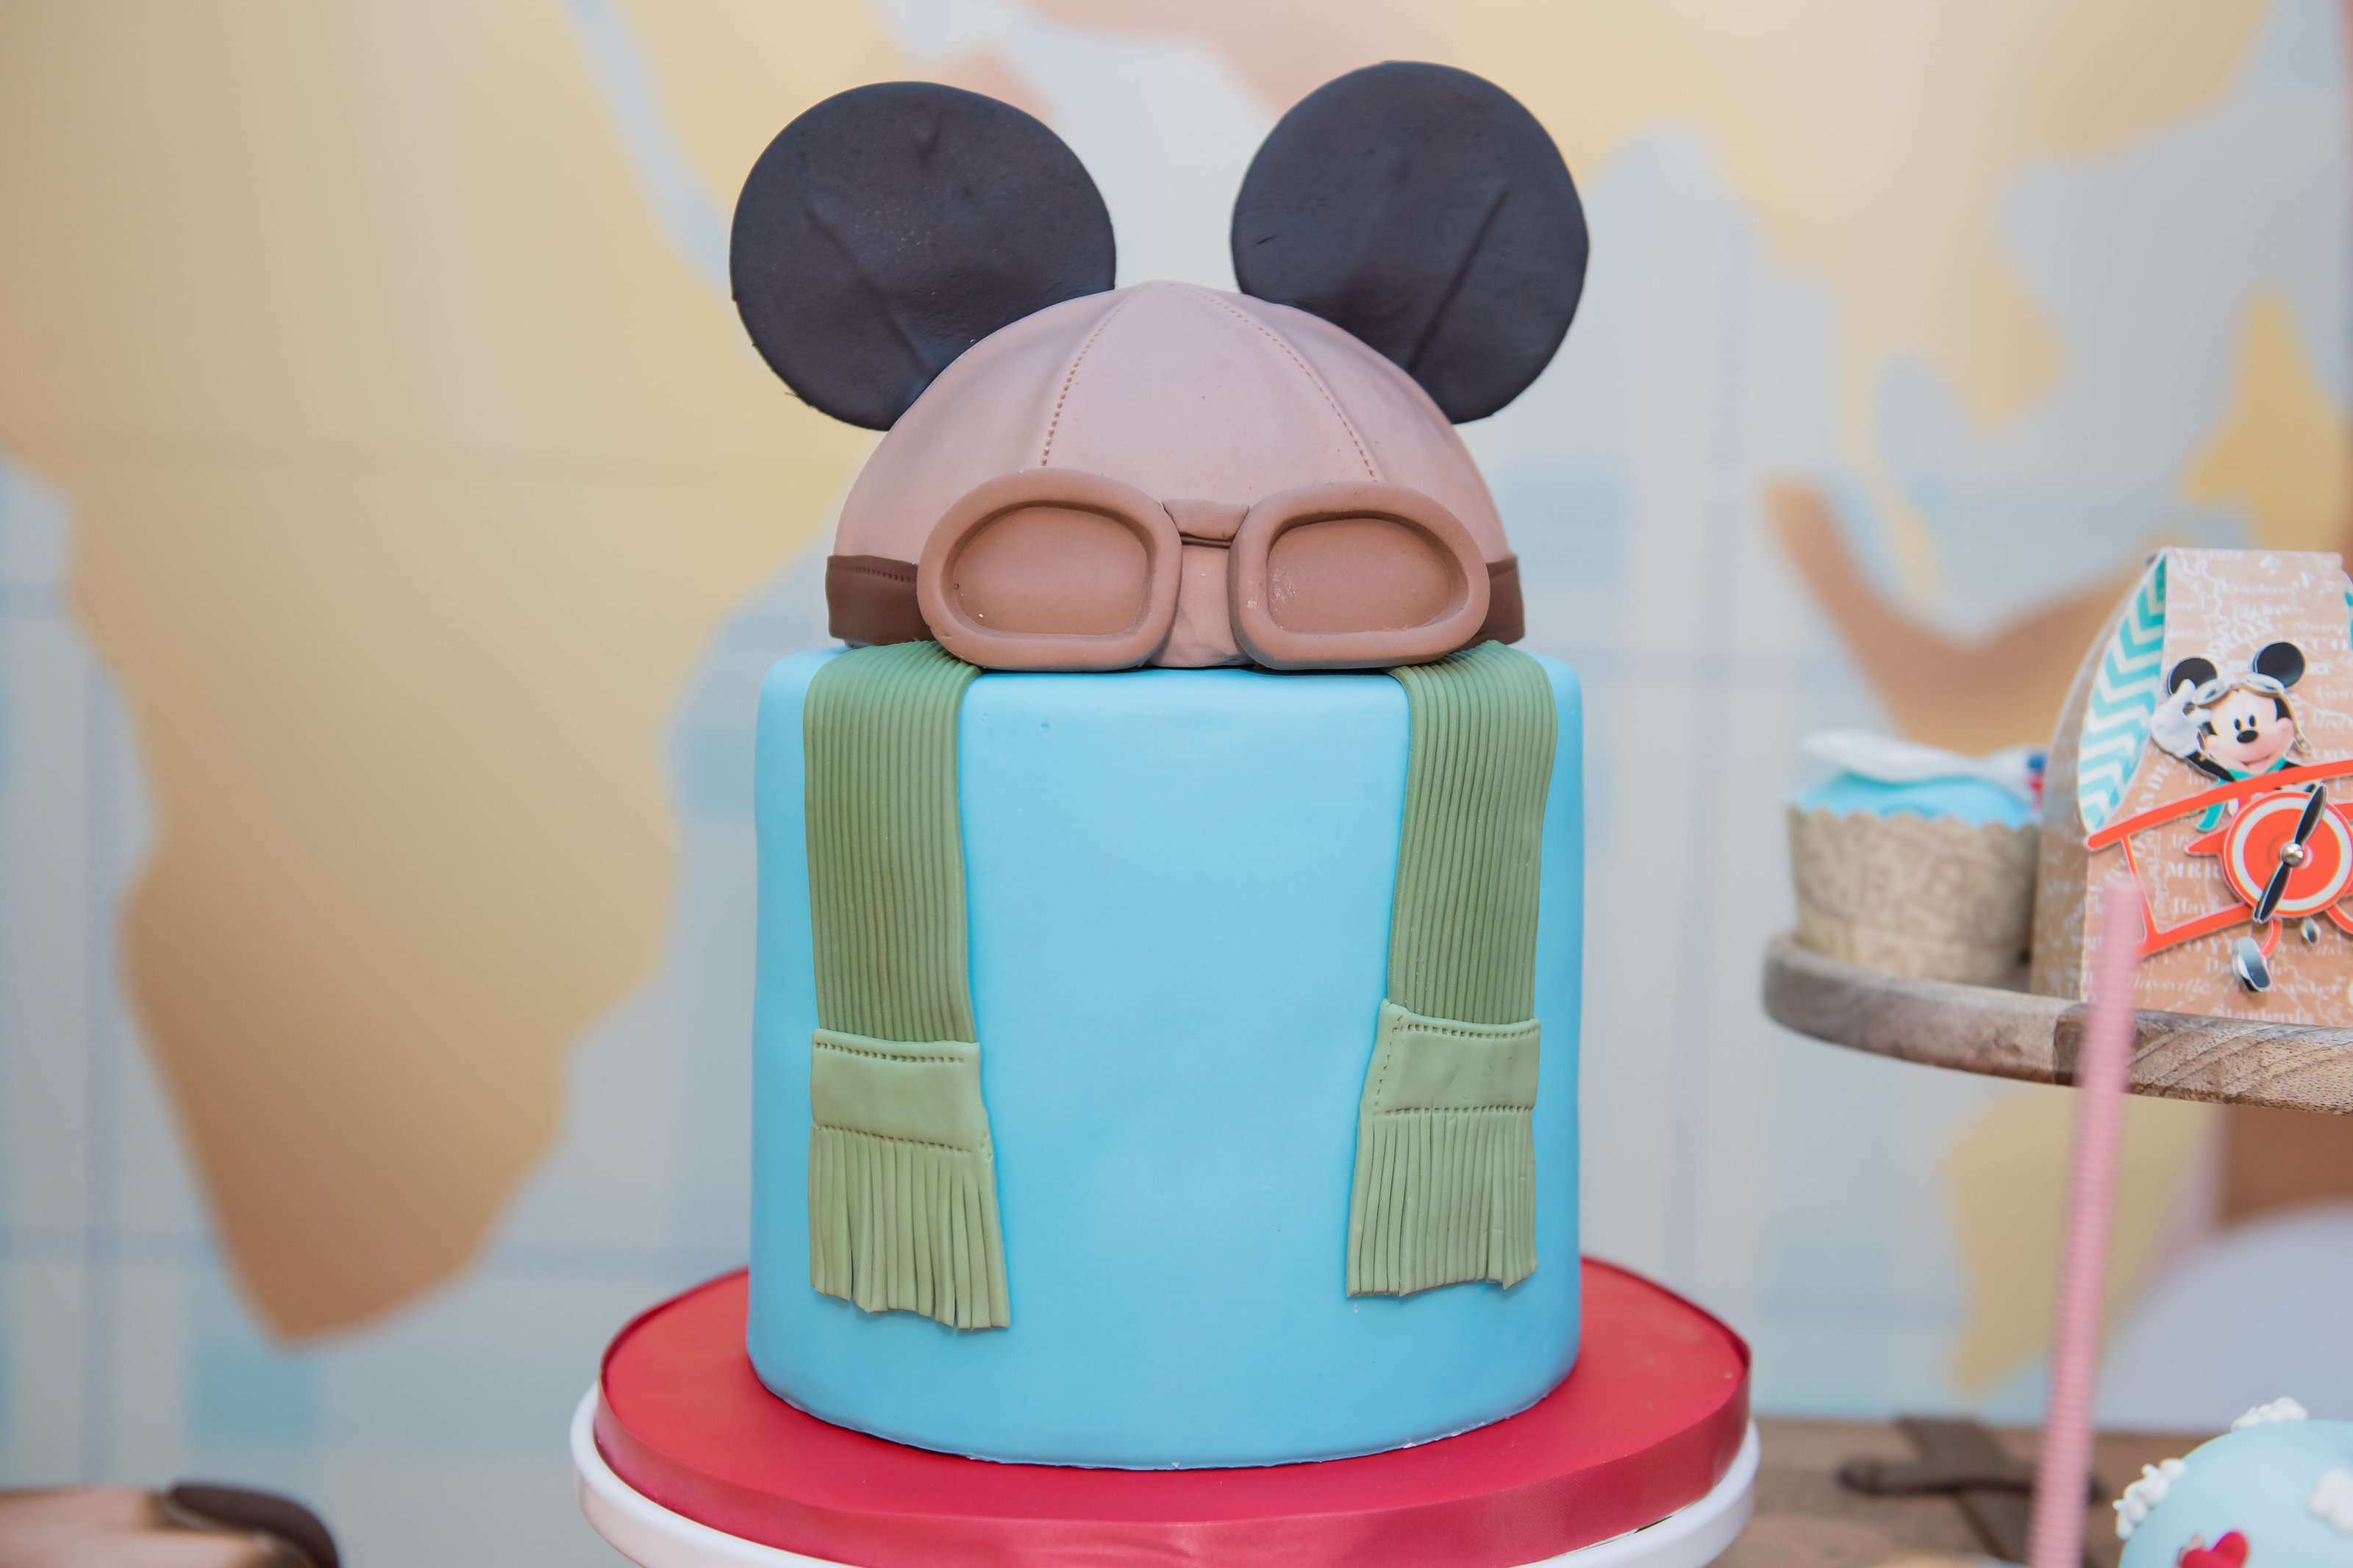 miami-event-planner-one-inspired-party-Mickey-Aviator-26